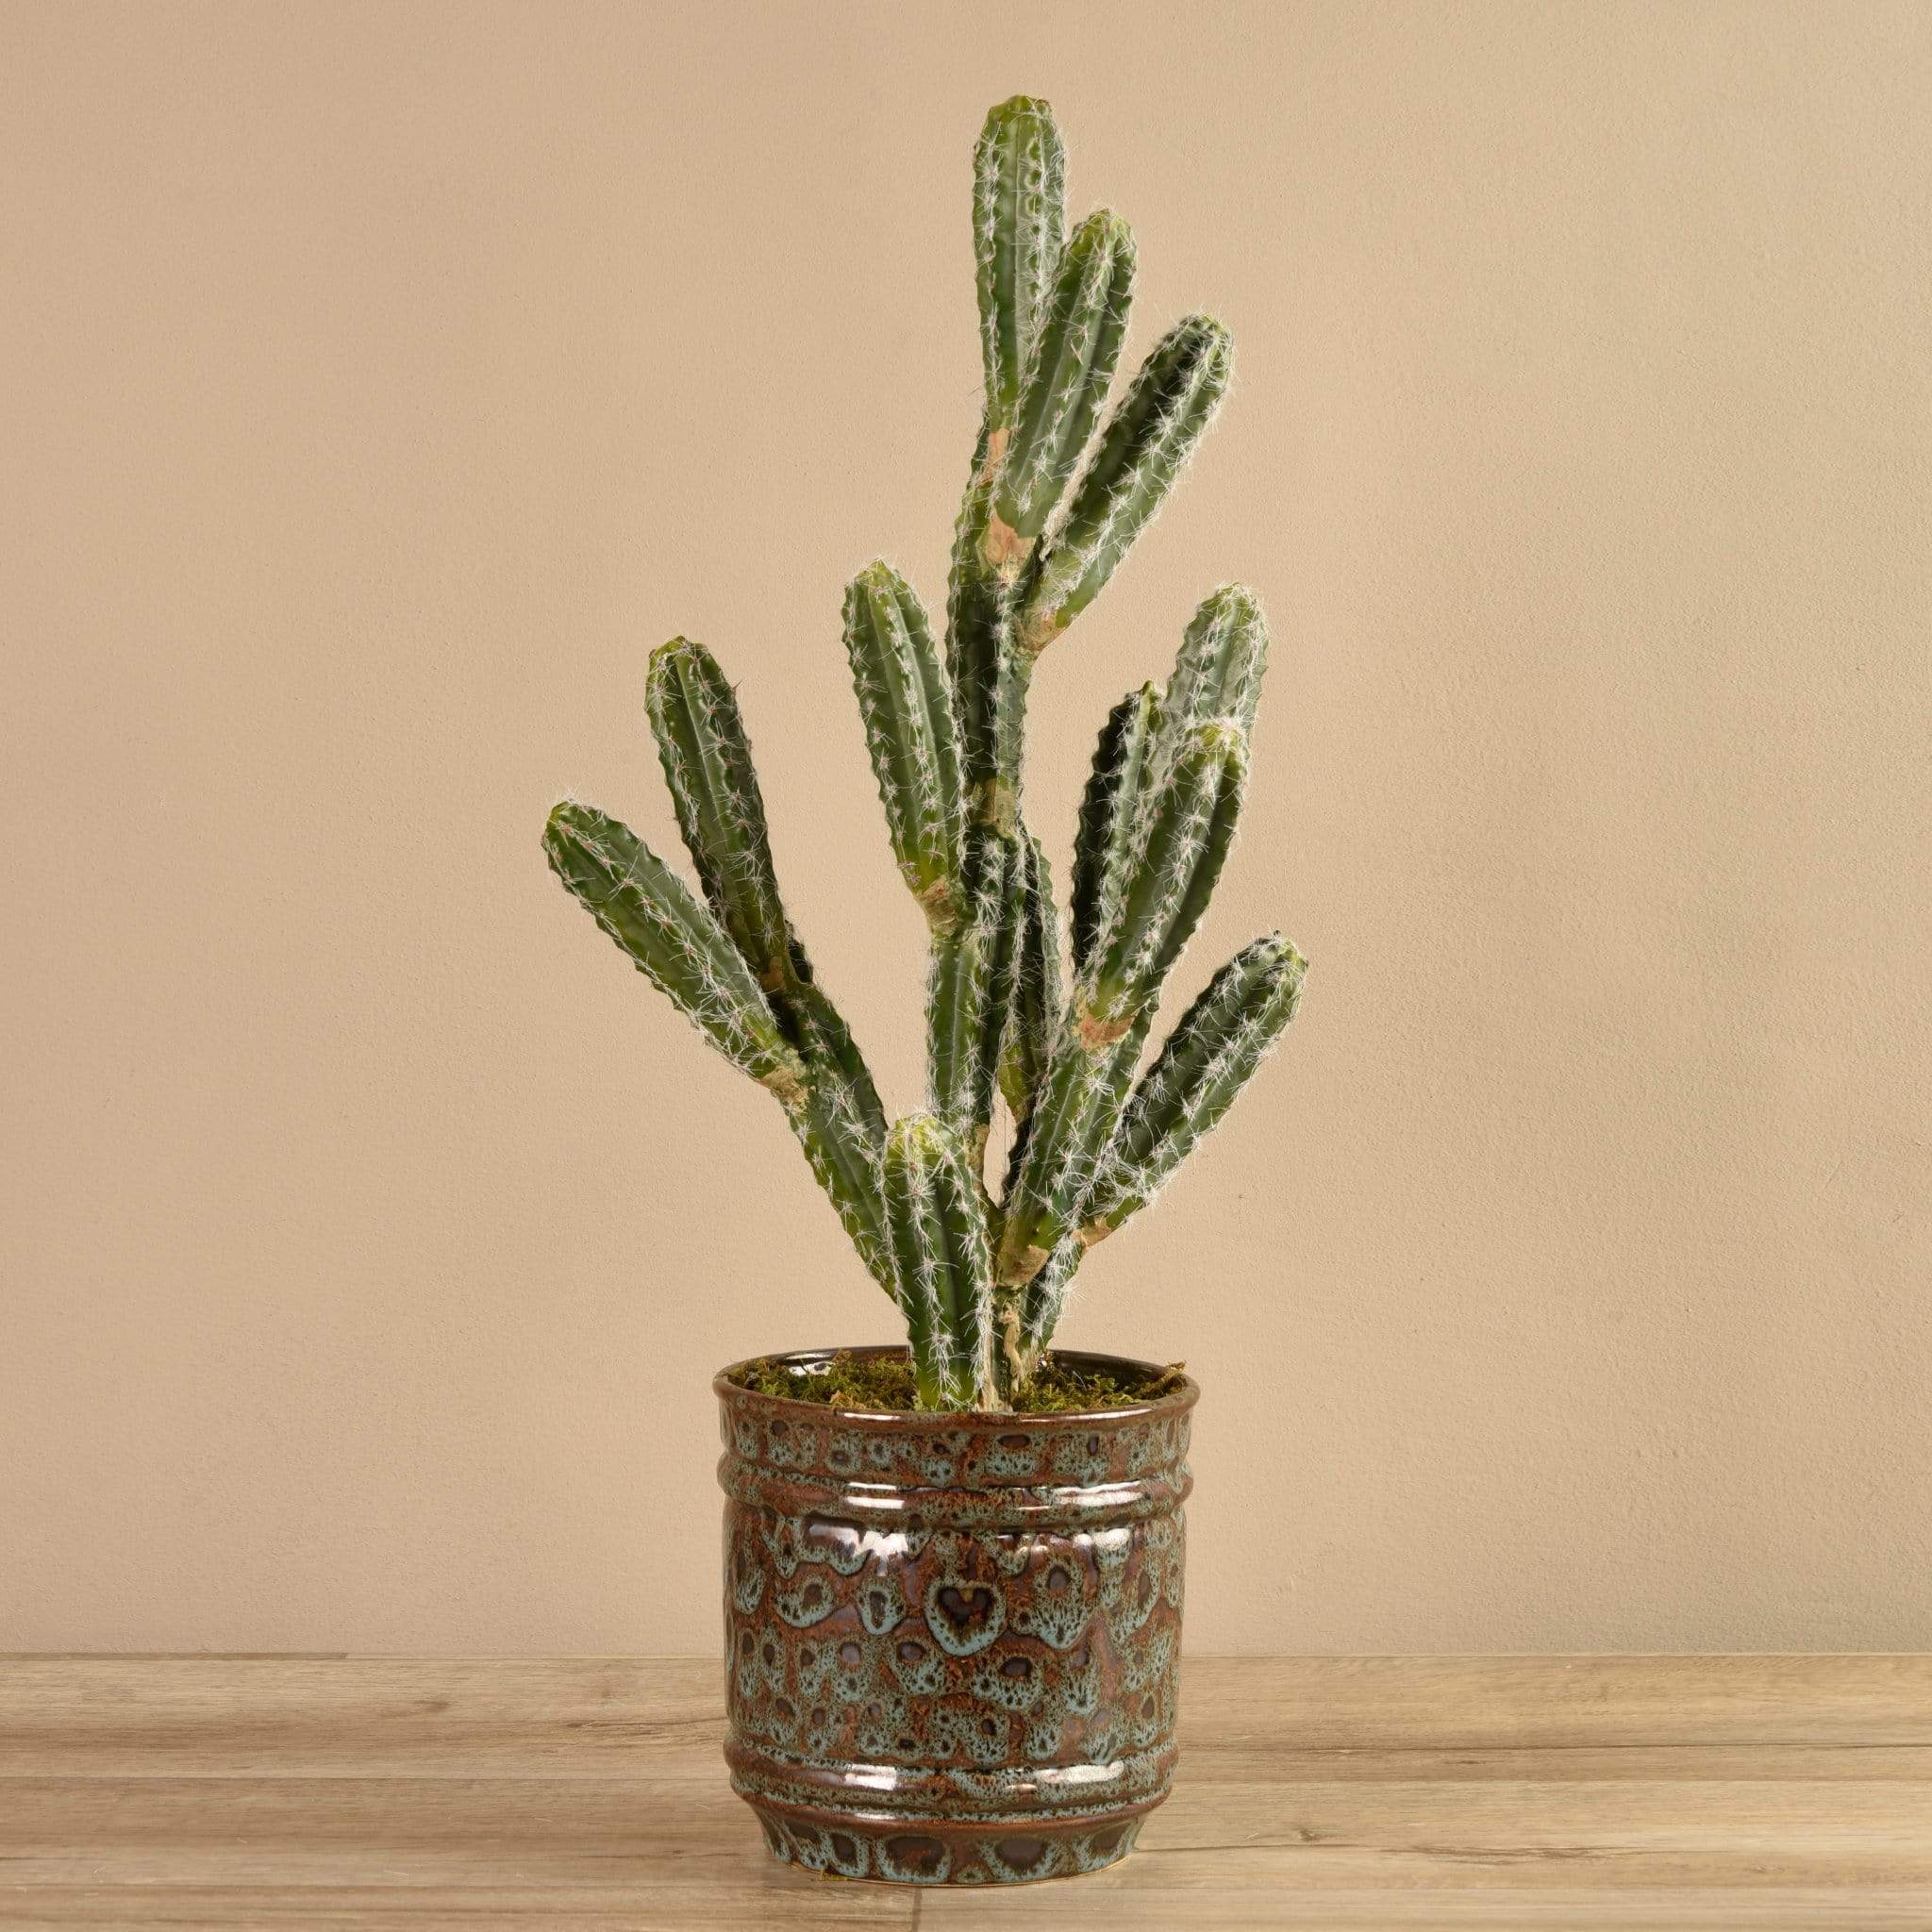 Potted Cactus - Bloomr